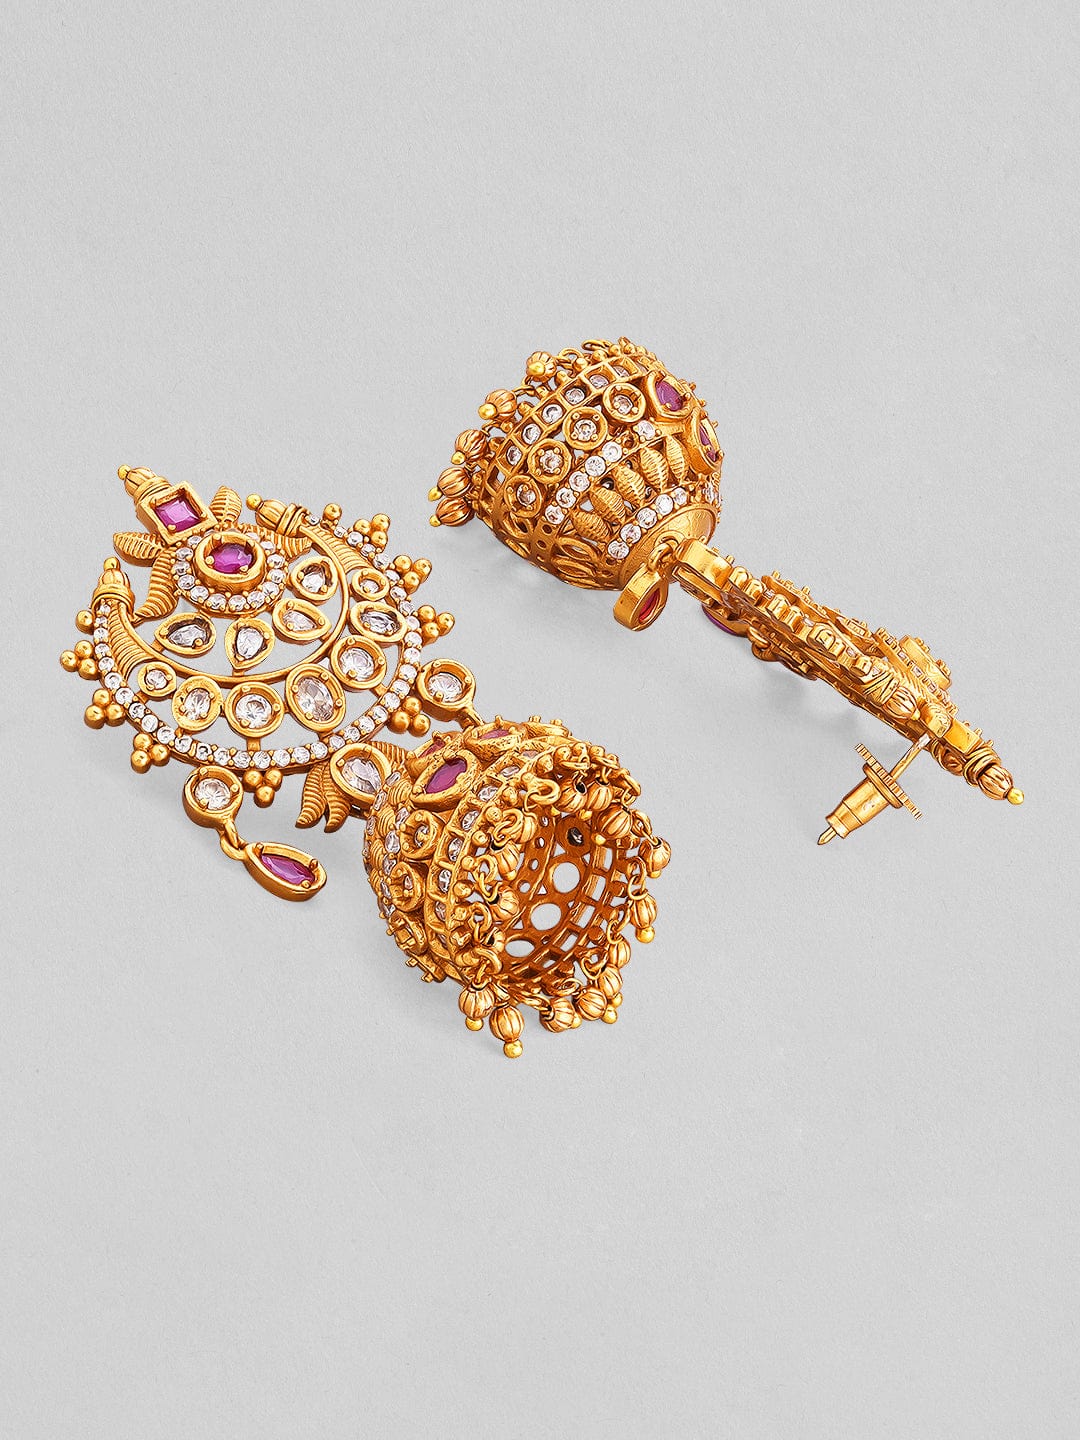 Rubans 24K Gold Plated Ruby and AD studded Jhumka earring. Earrings